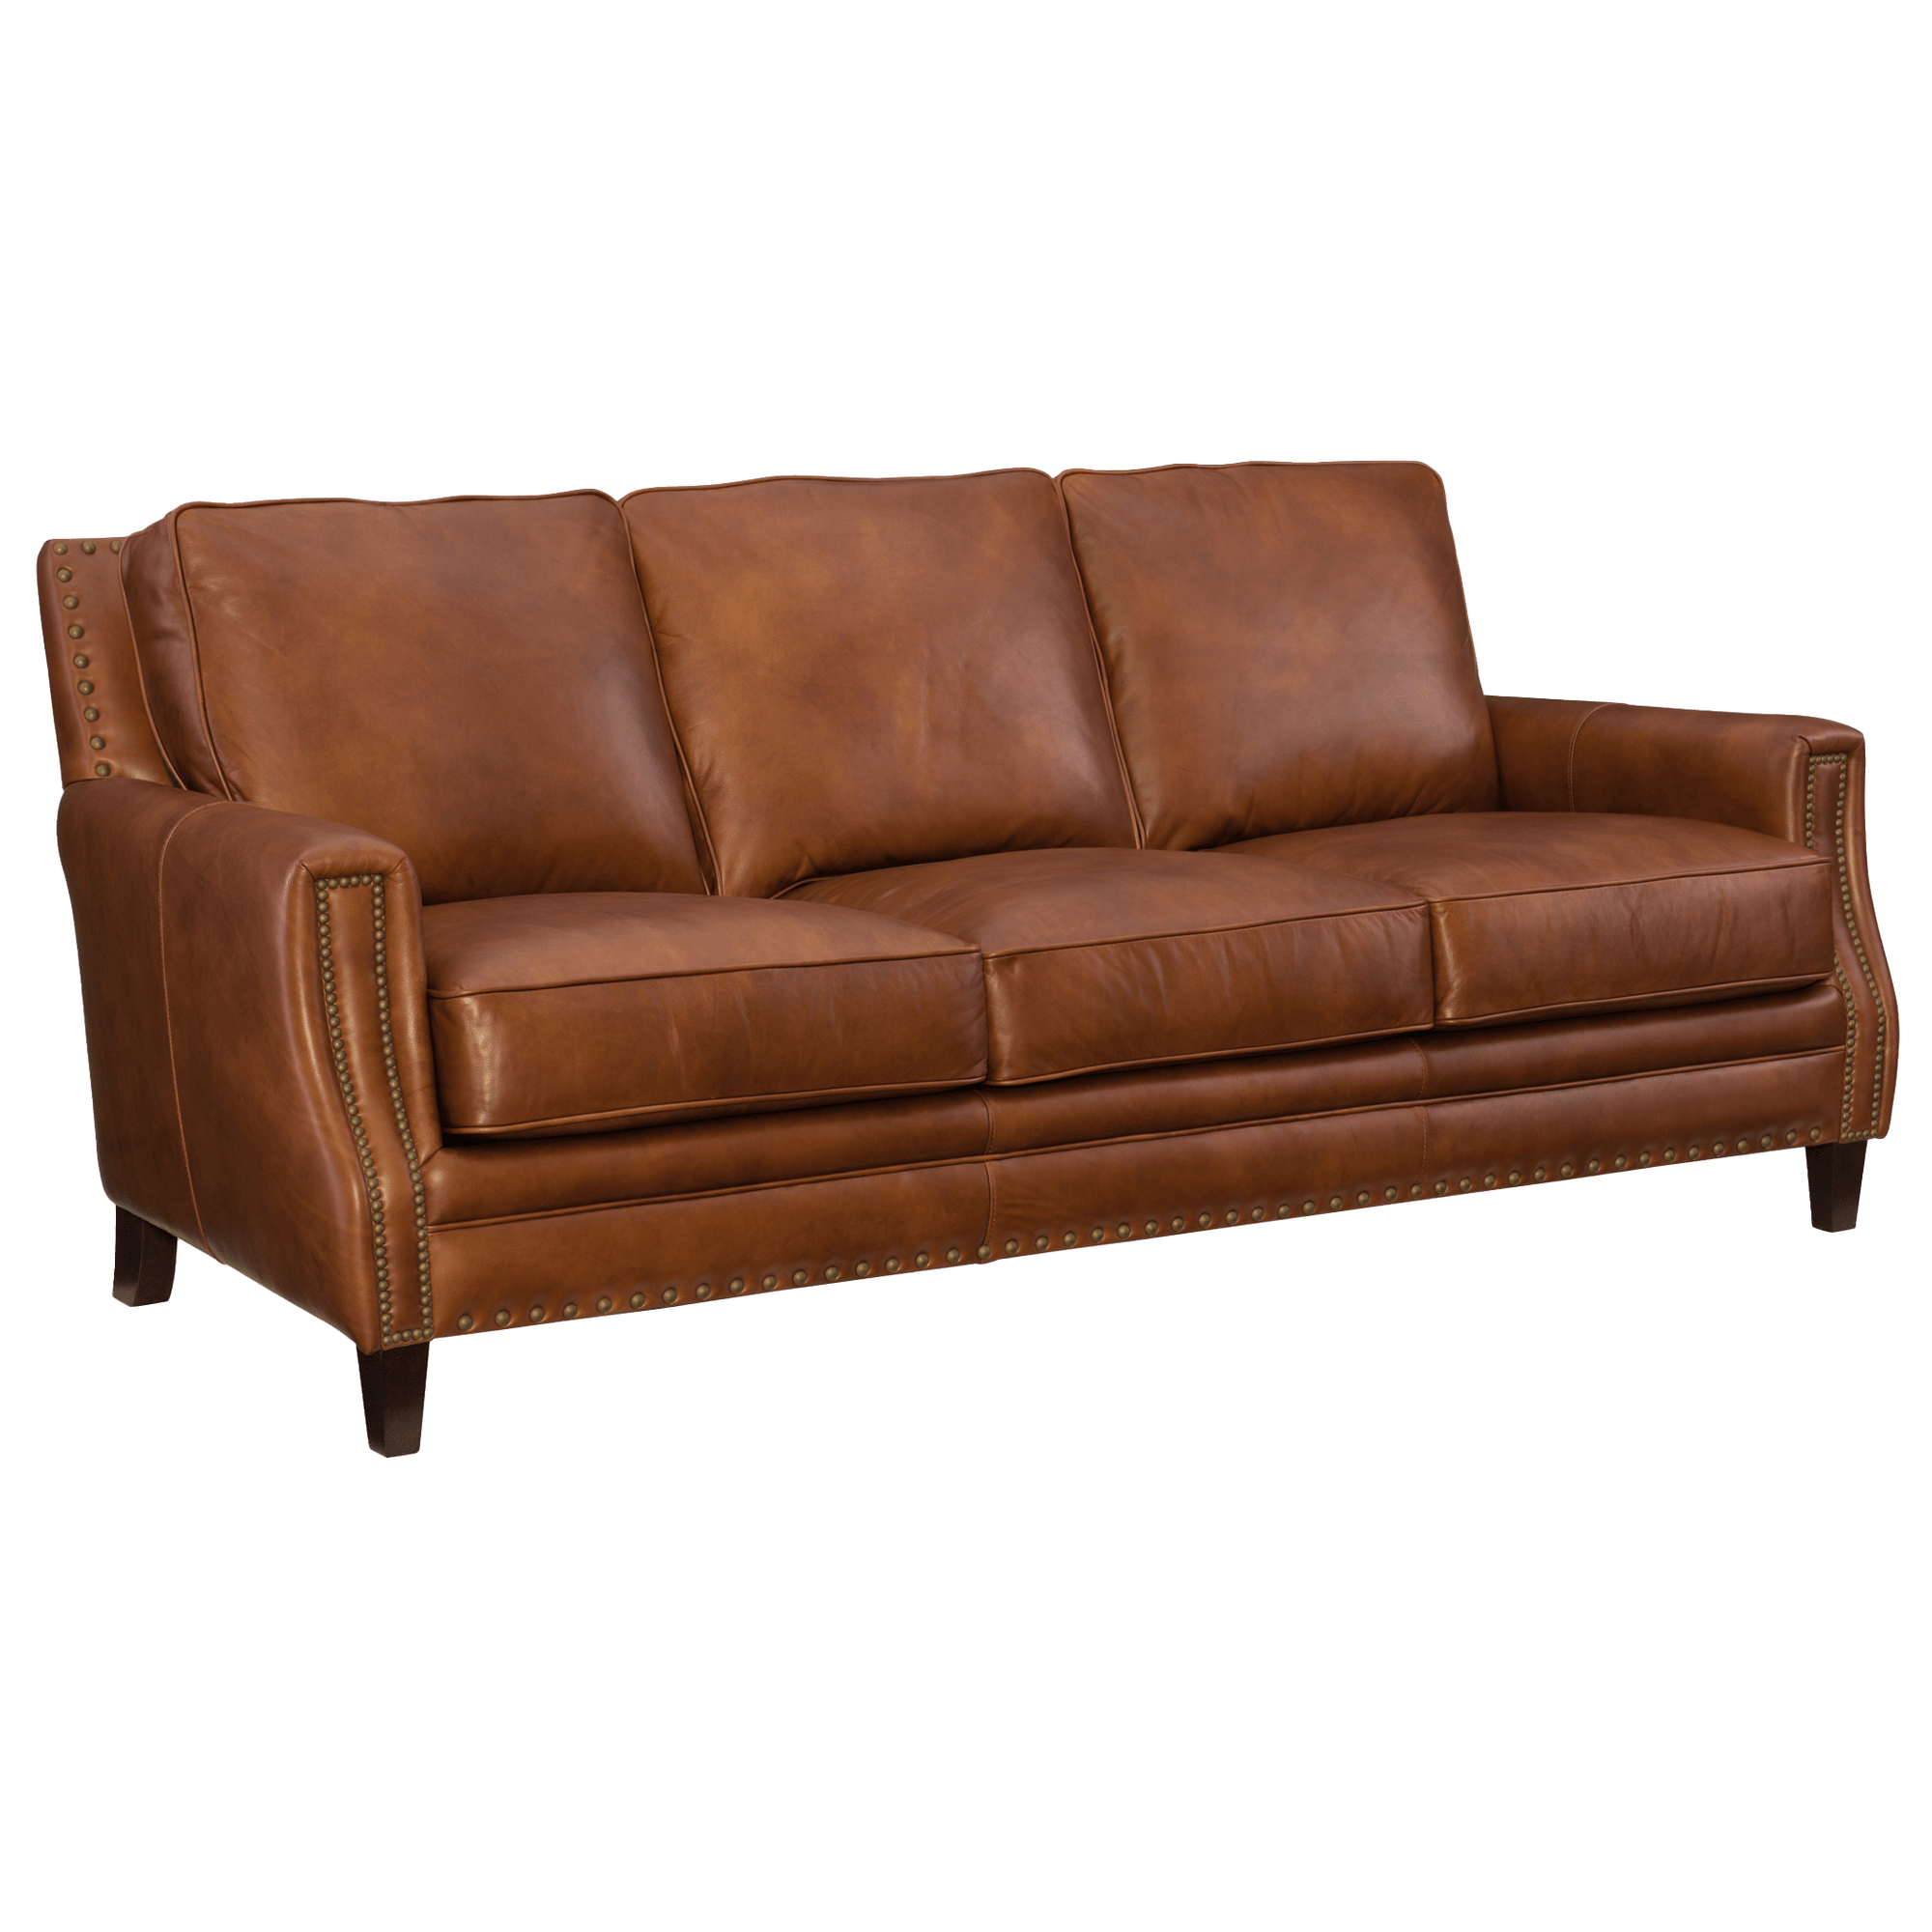 Elpido 83" Wide Upholstered Leather Sofa, Brown - Coja